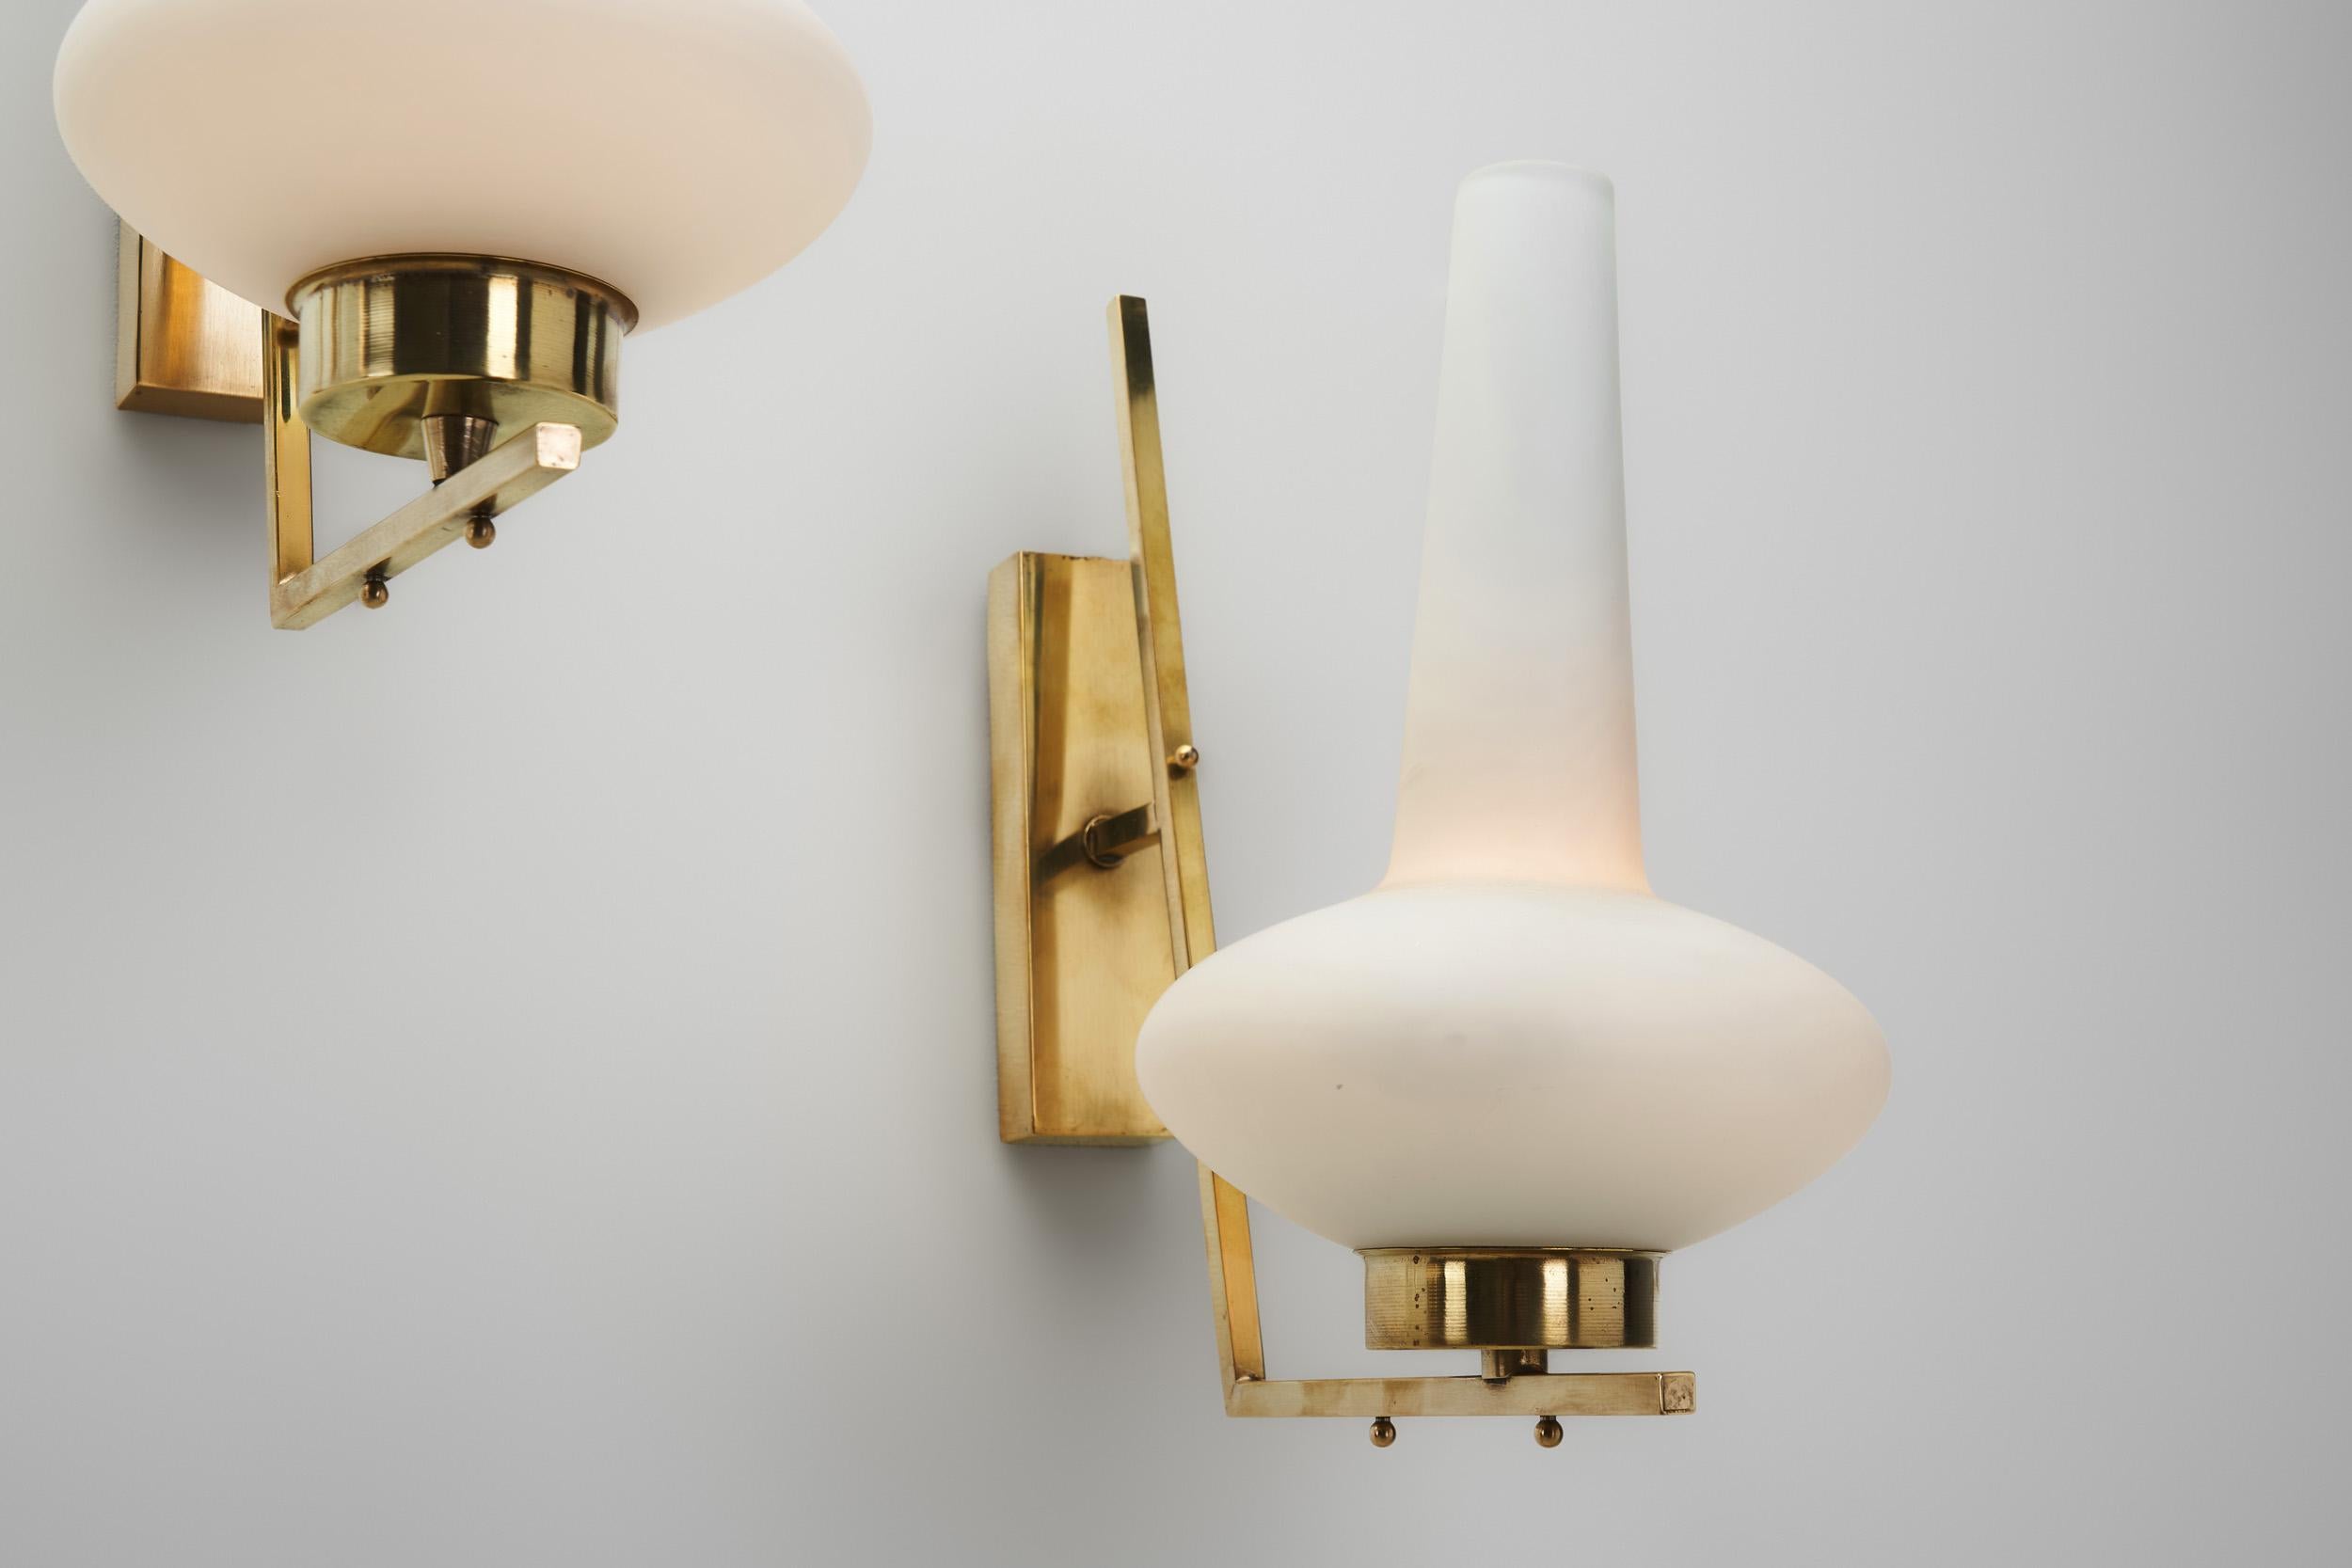 Italian Mid-Century Modern Brass Wall Lamps, Italy, 1950s For Sale 4